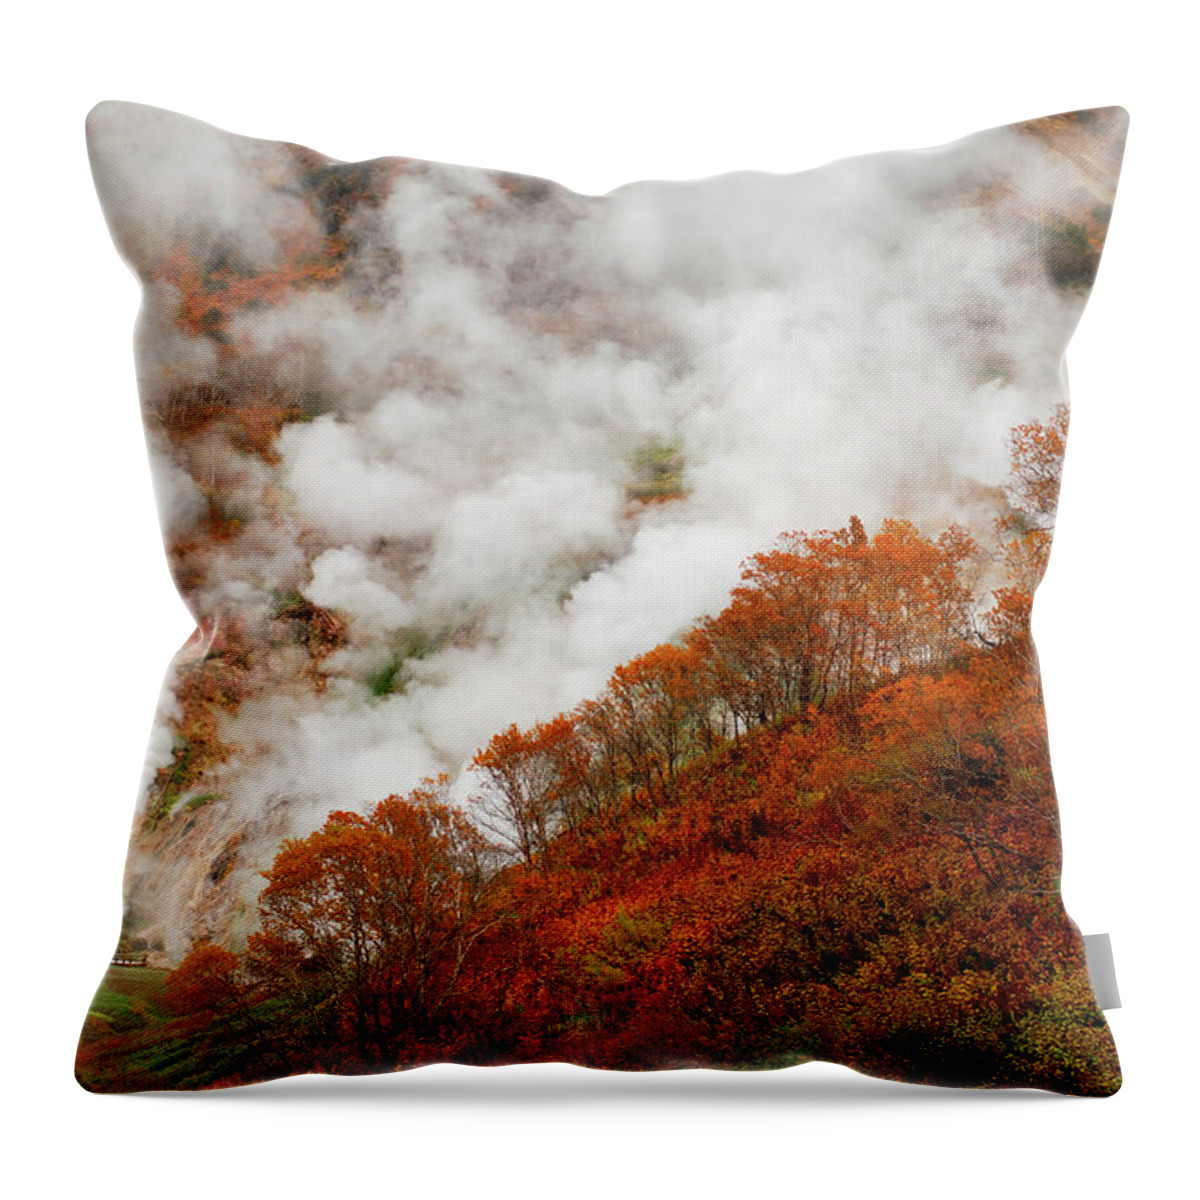 Autumncollection Throw Pillow featuring the photograph Ermans Birch Trees, Valley Of Geysers, Kamchatka, Russia by Igor Shpilenok / Naturepl.com